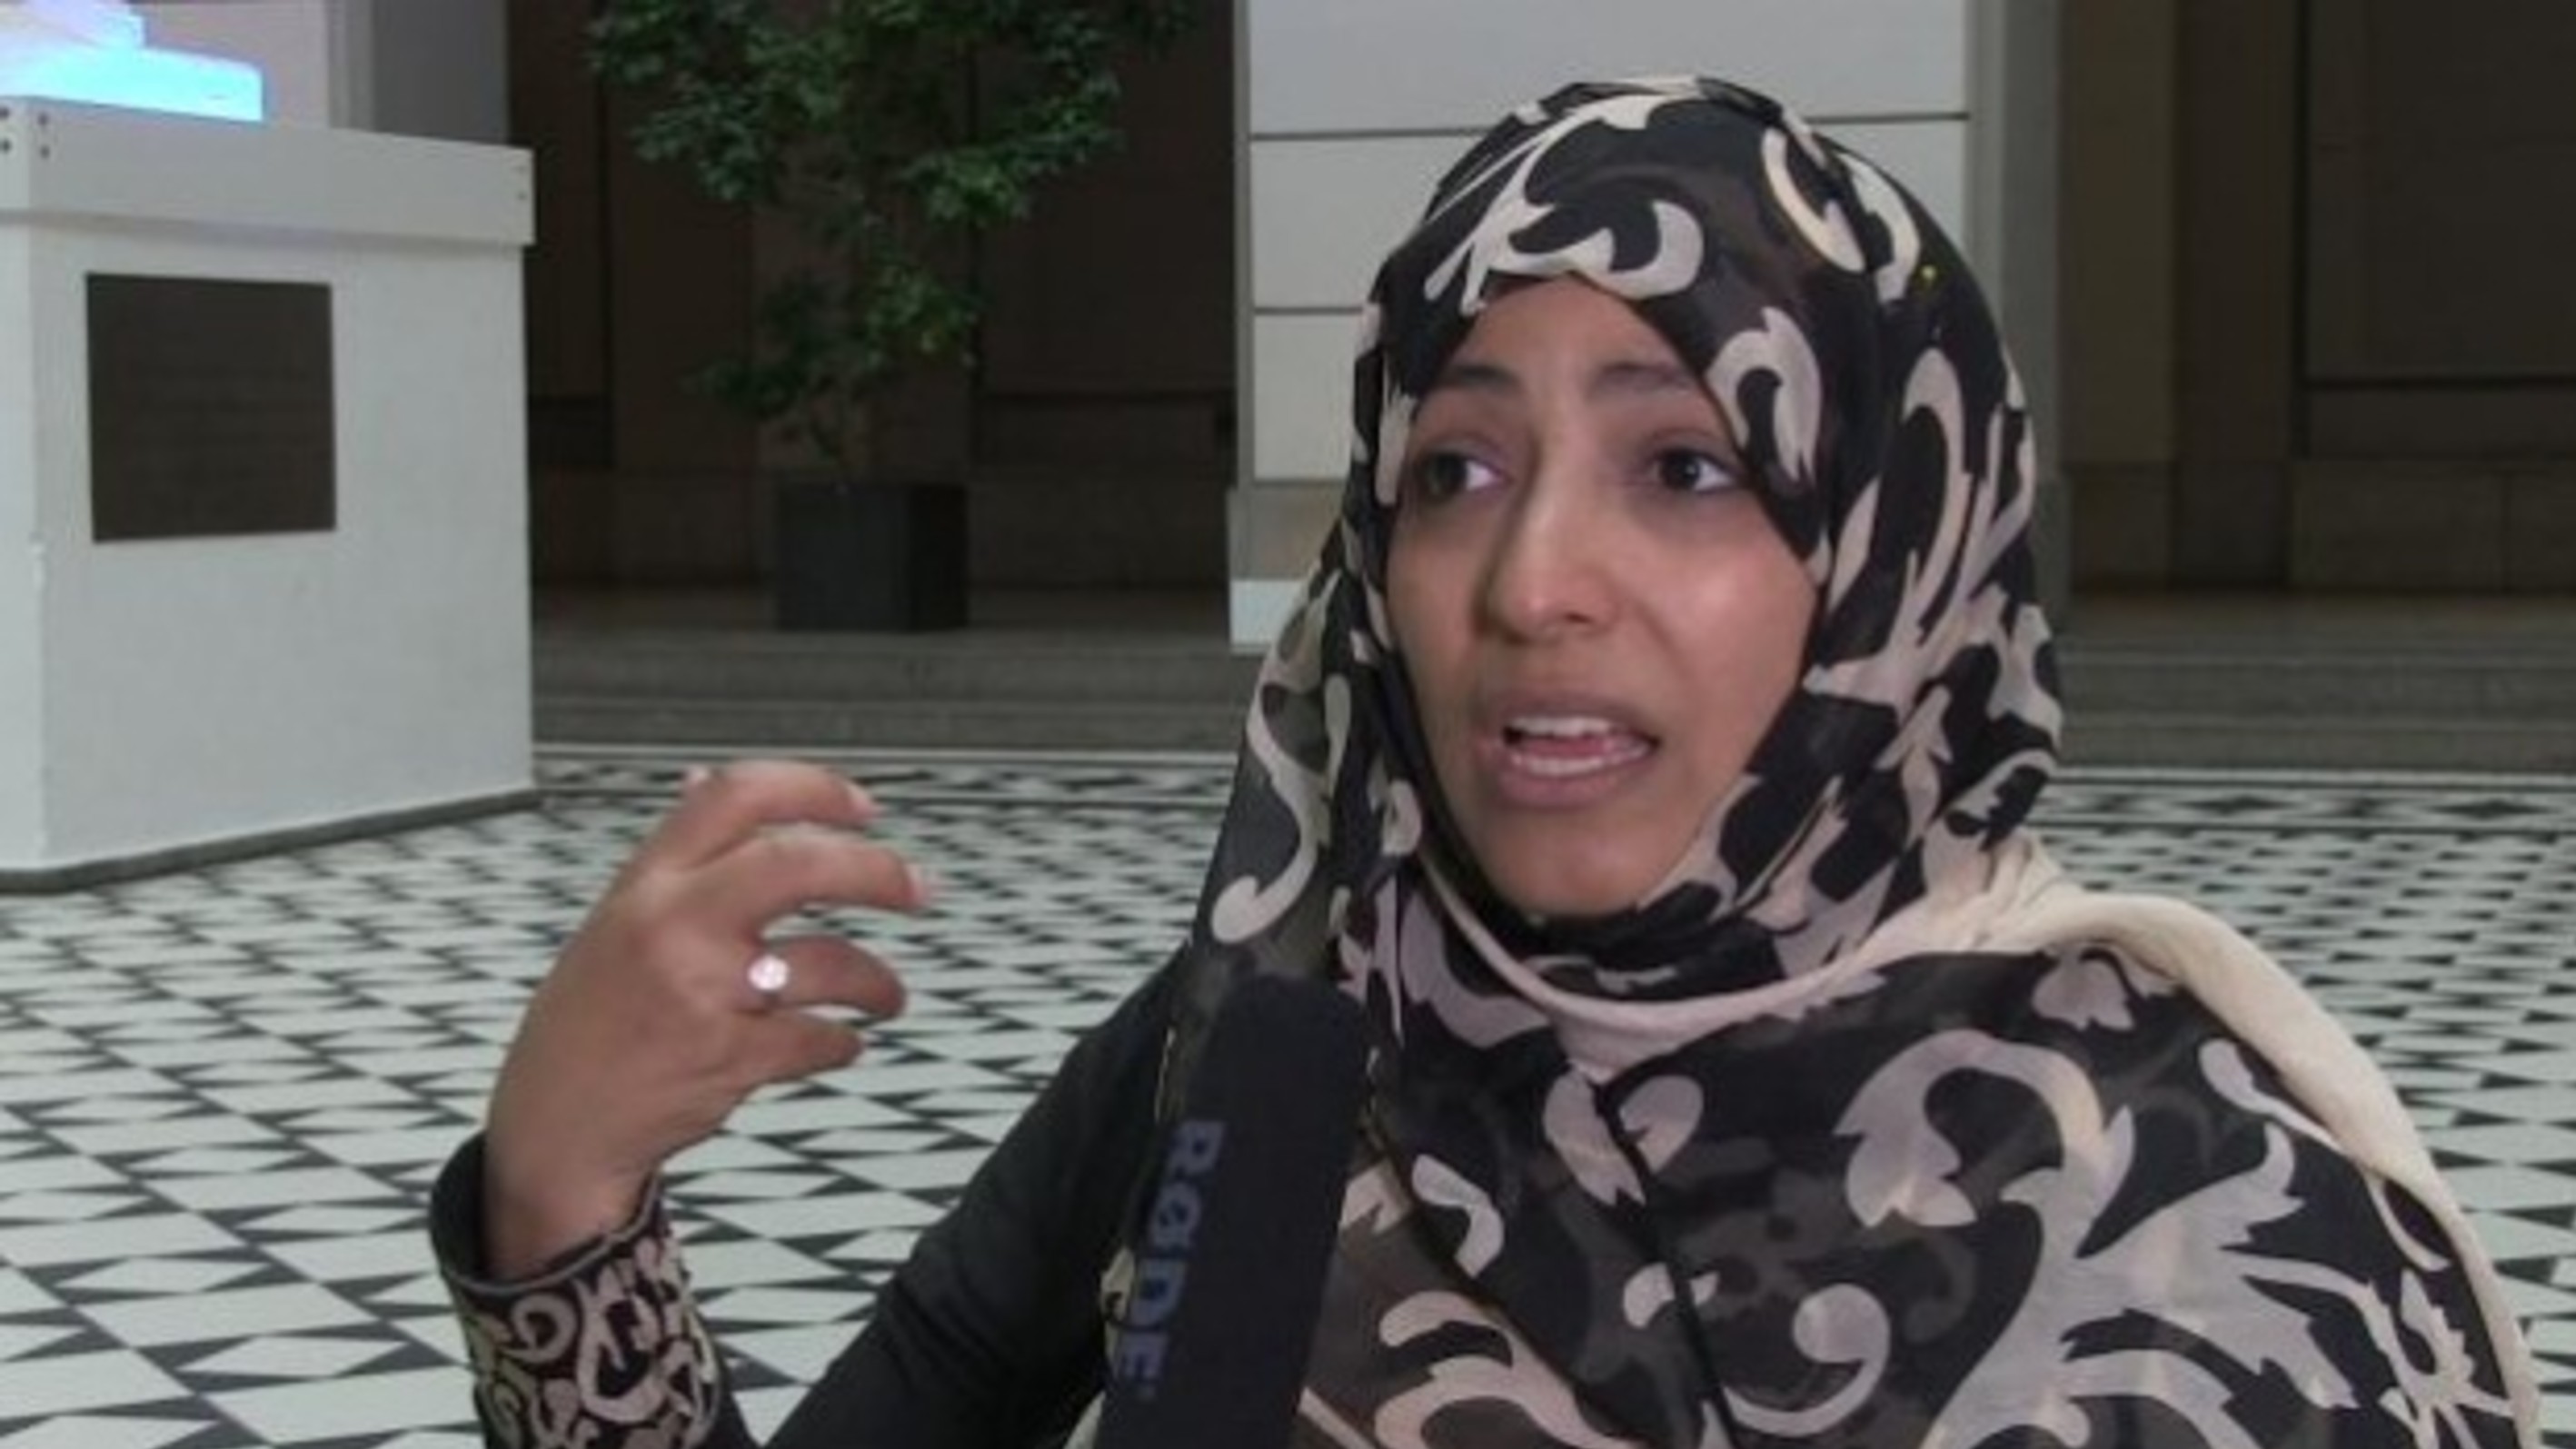 Tawakkol Karman’s TV interview with Berlin-based TV new magazine “ Kontext TV at the World Congress of the International Peace Bureau, “Disarm for a Climate of Peace,” at the Technical University of Berlin